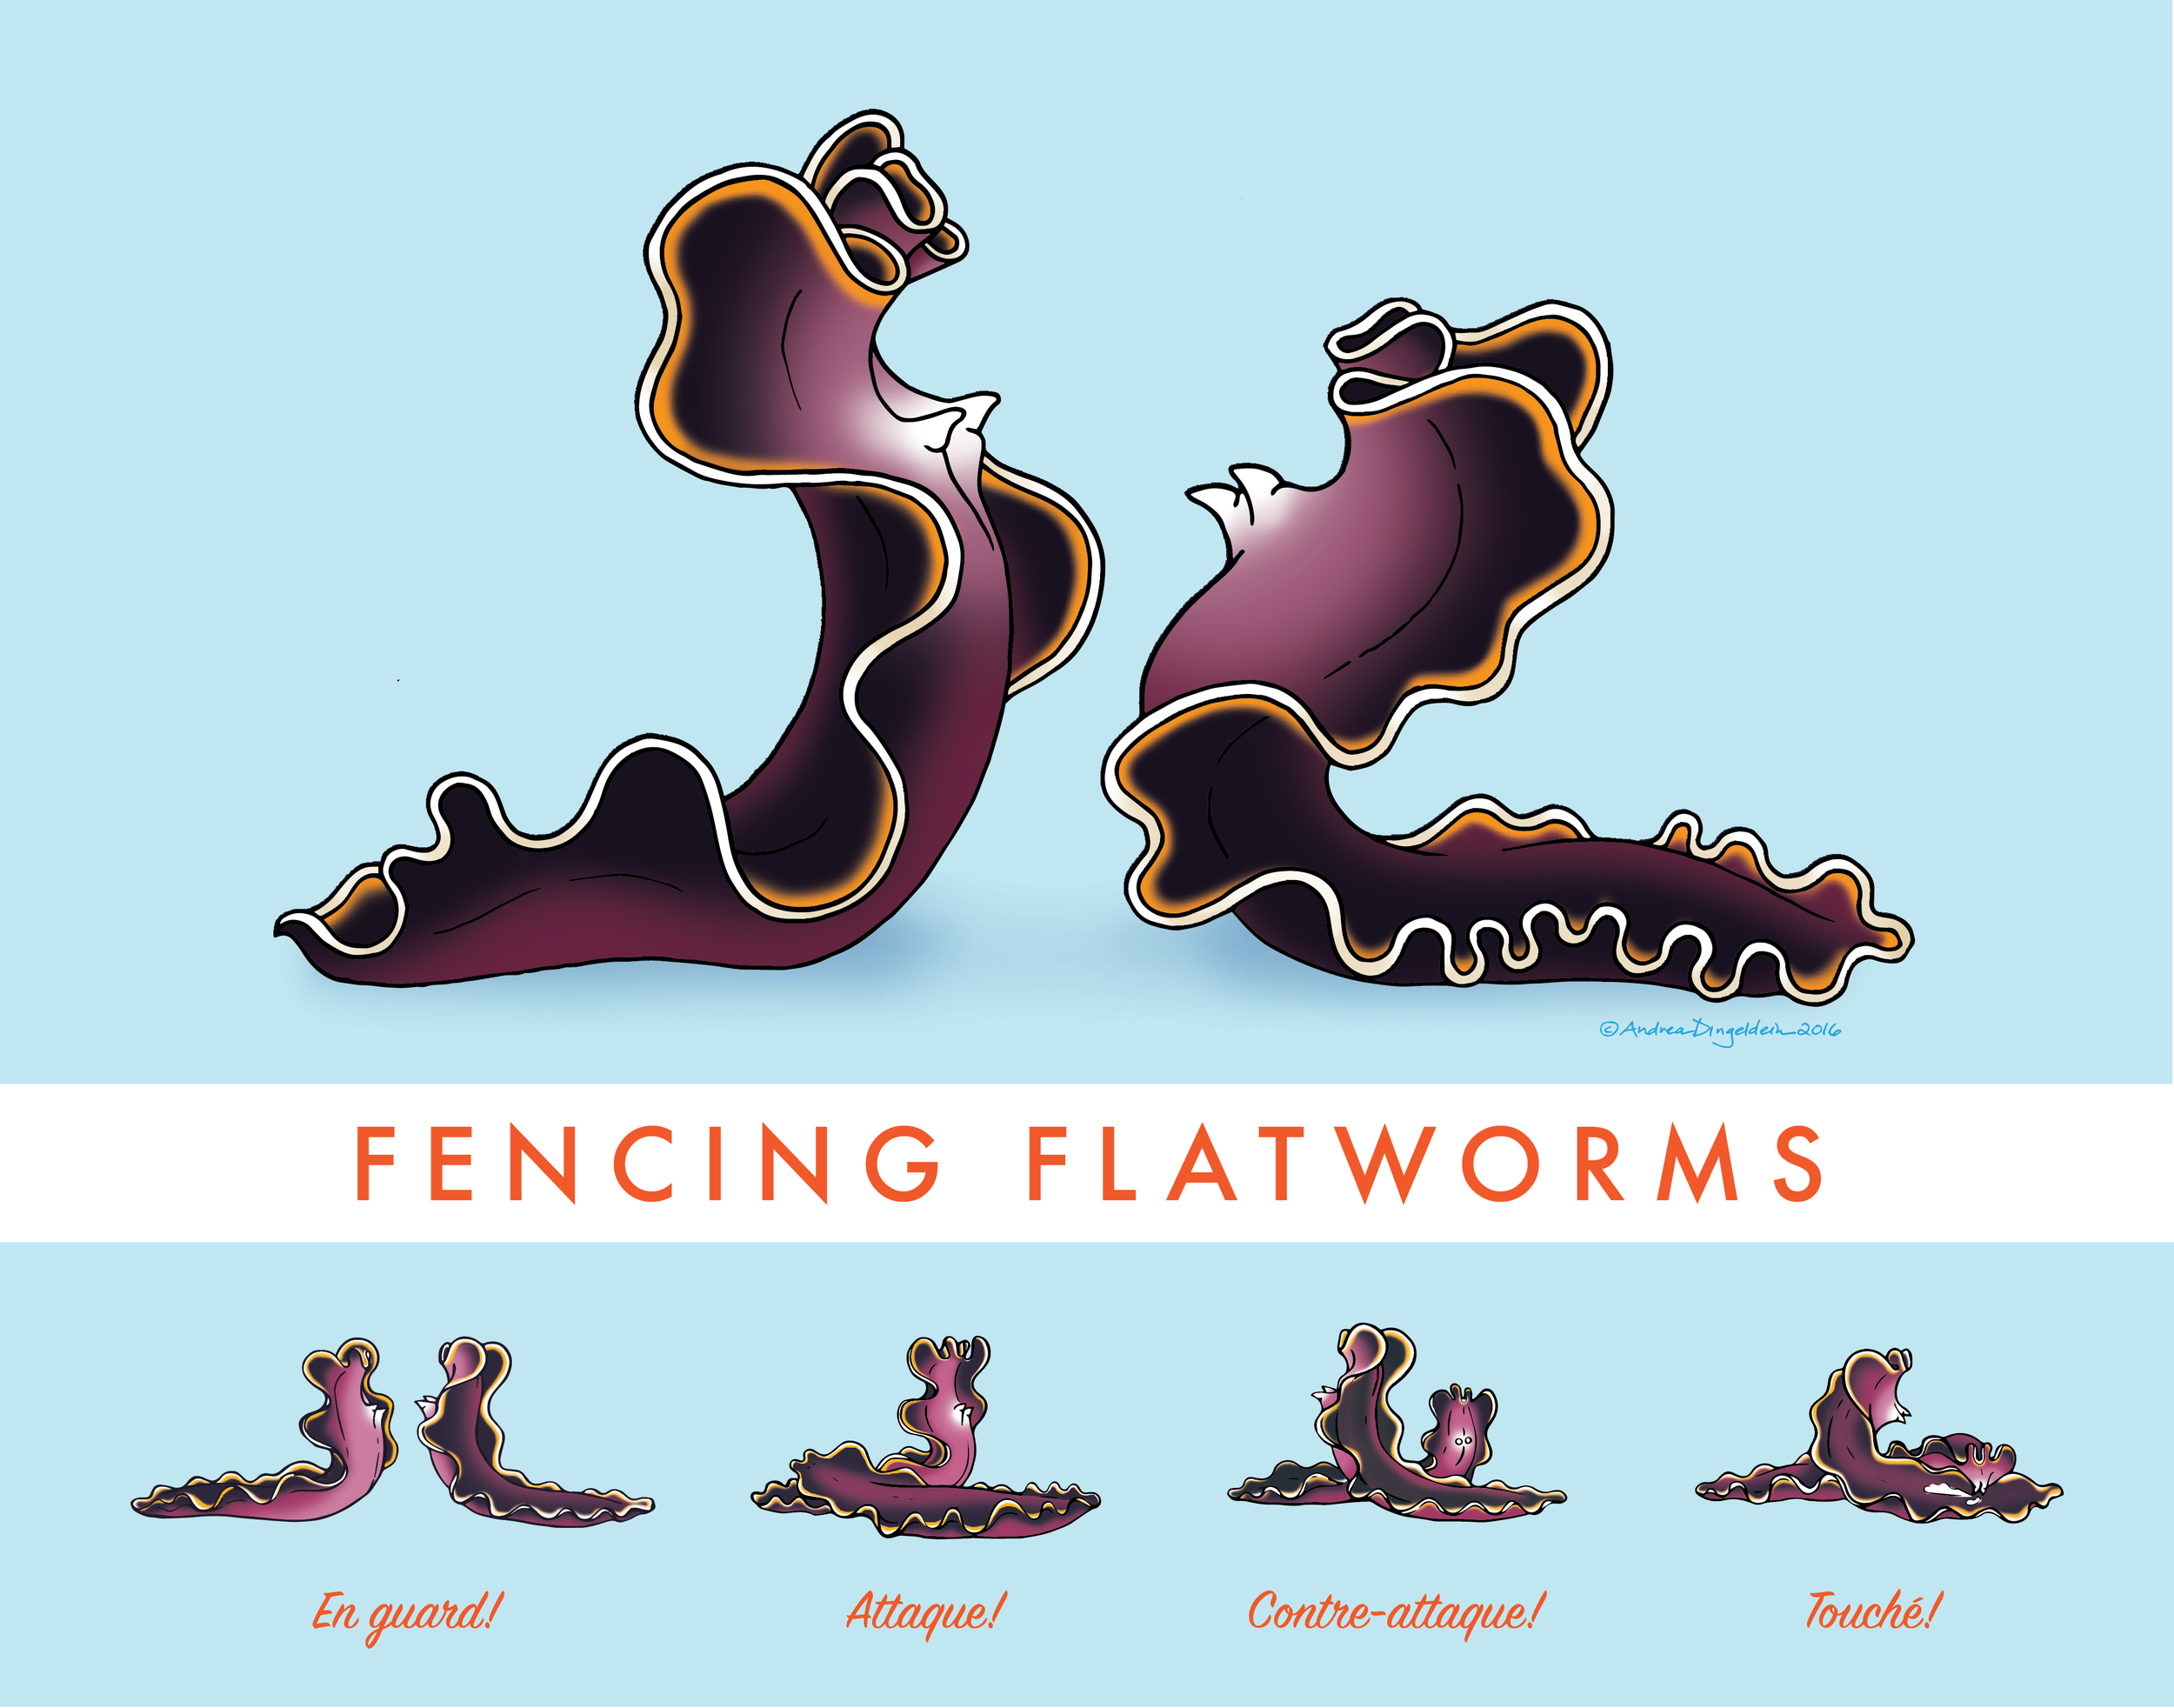 Flatworm Penis Fencing